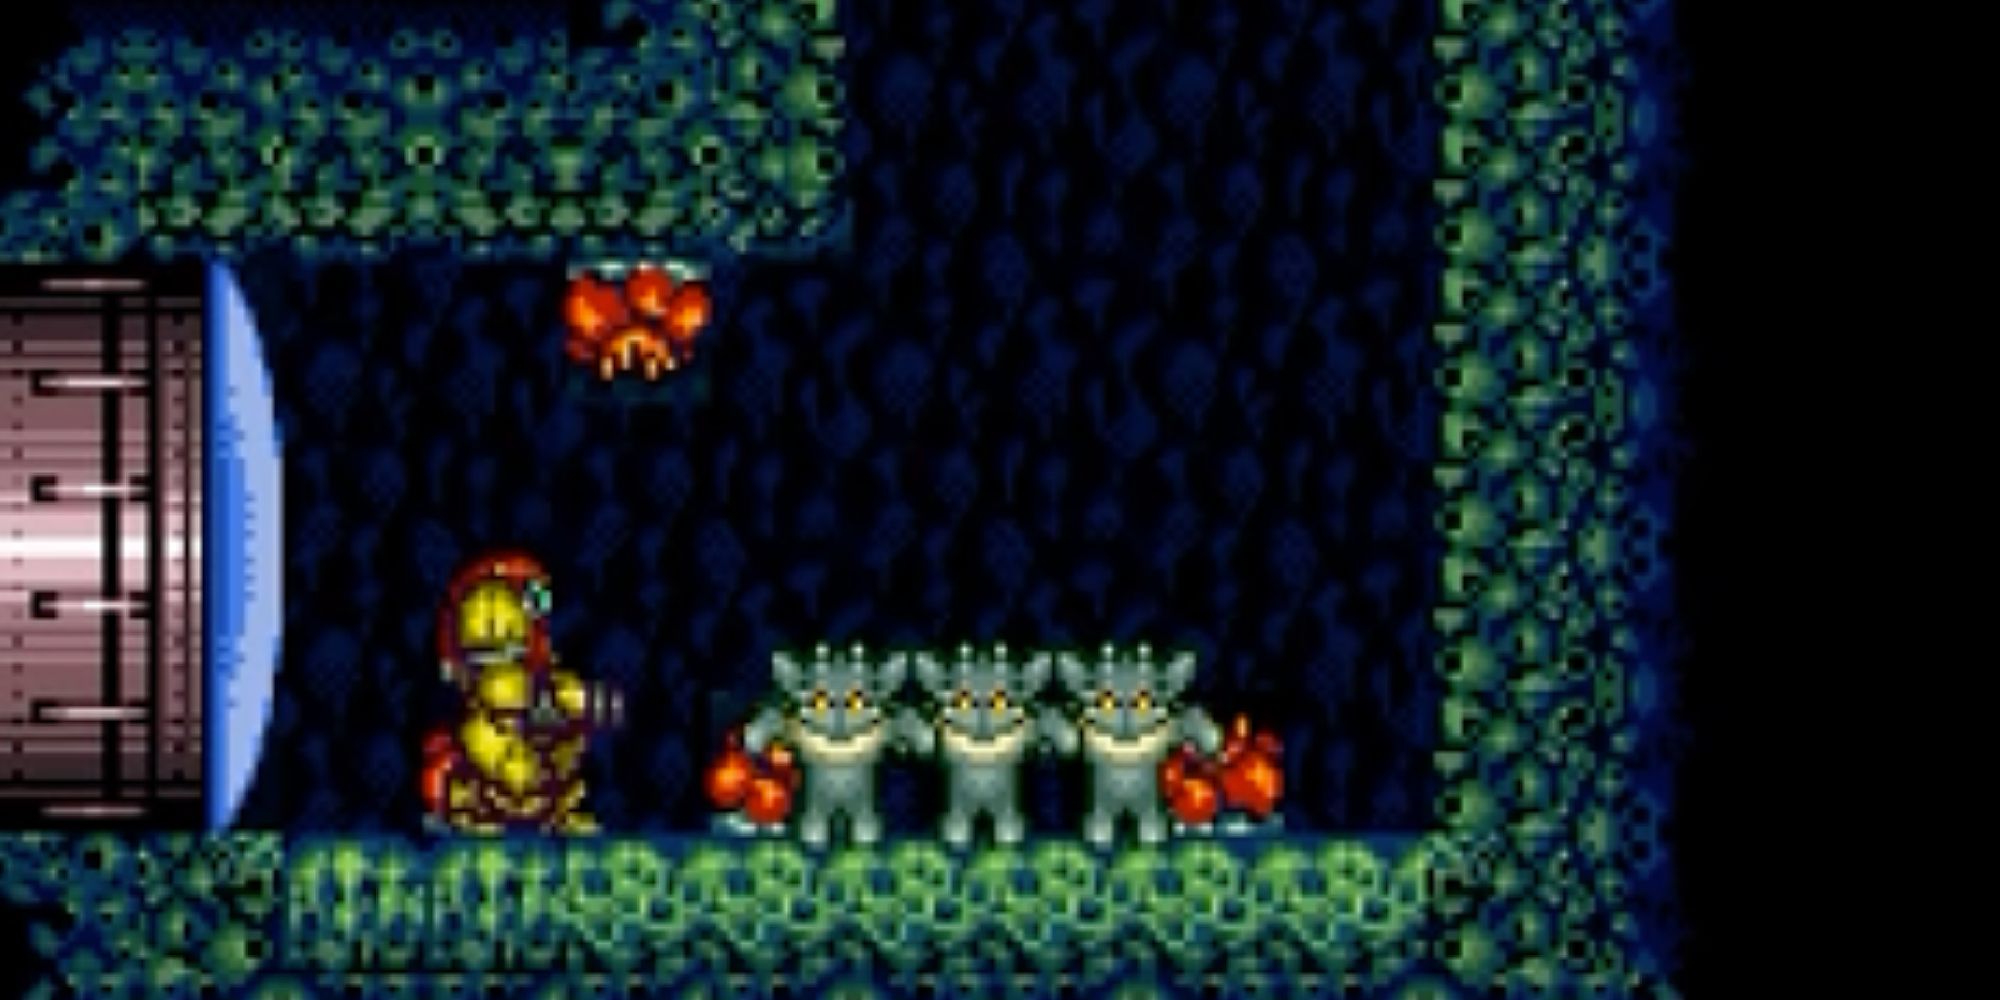 Samus enters Super Metroid's wall-jumping room and three small creatures teach her how to wall-jump.